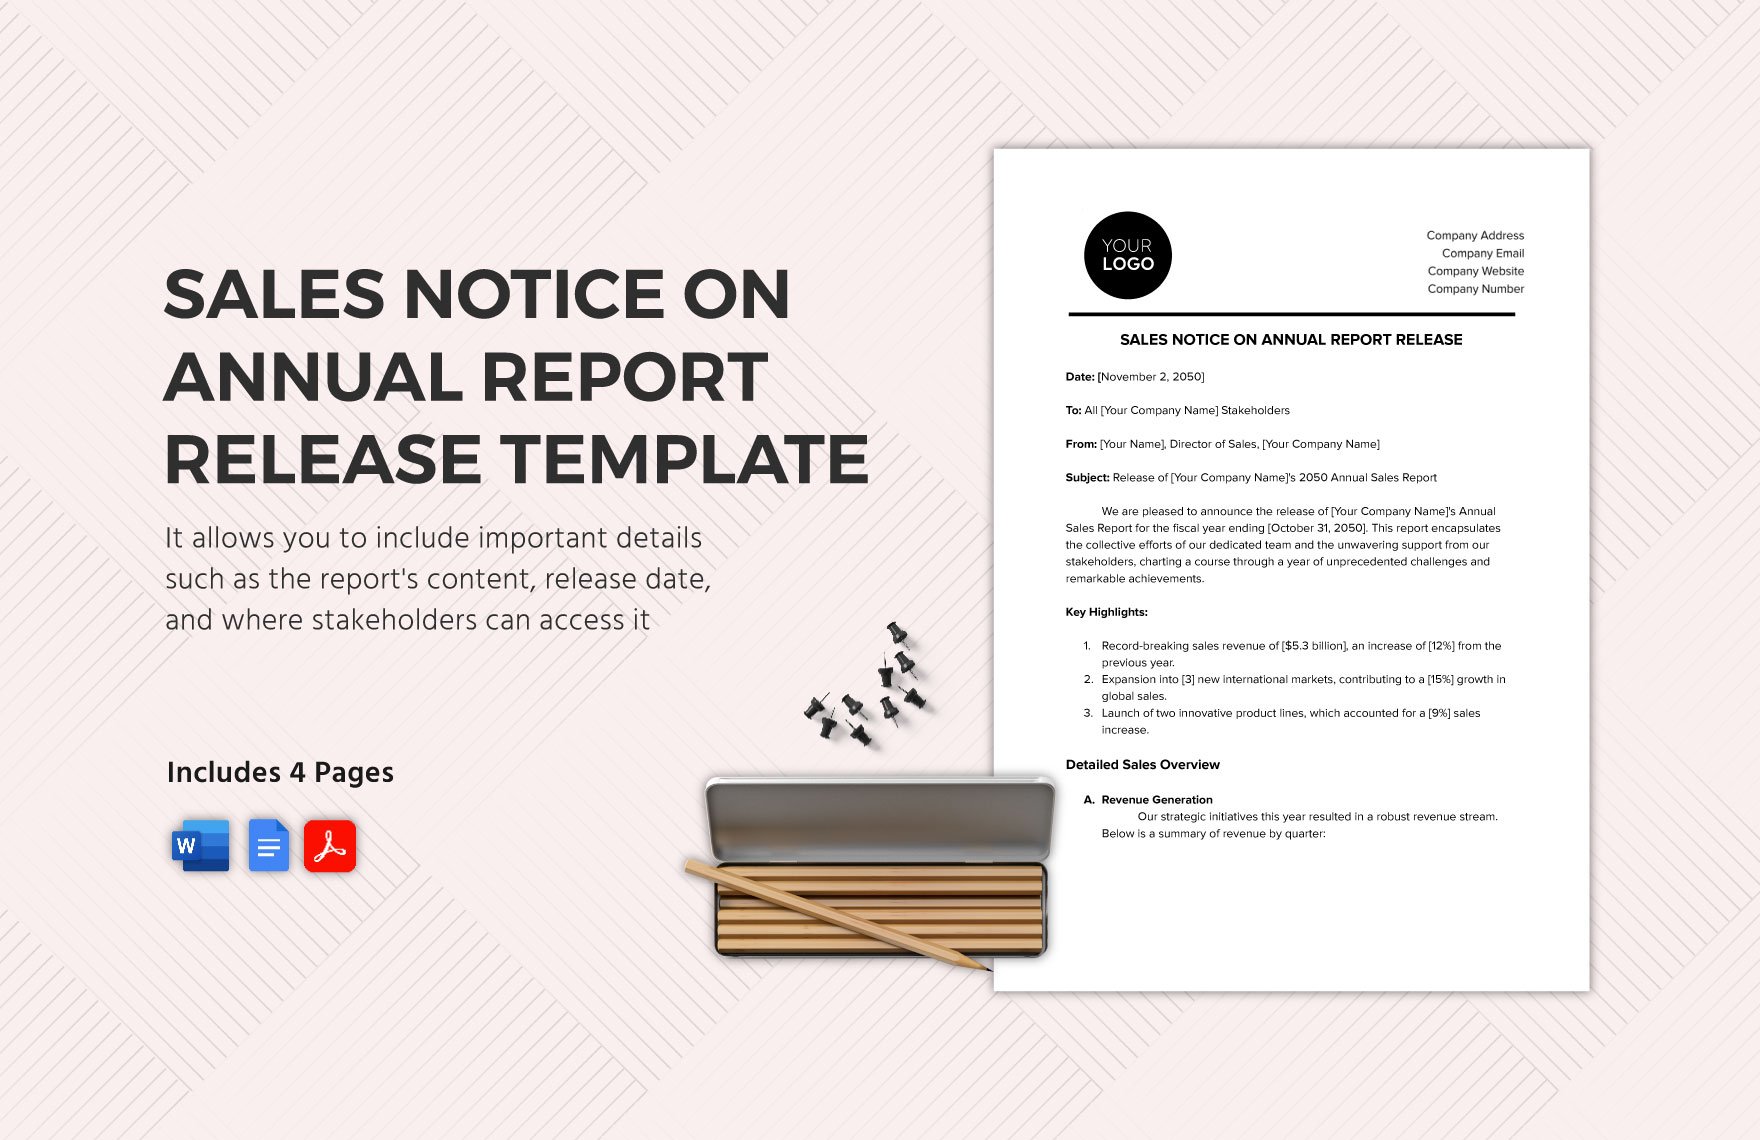 Sales Notice on Annual Report Release Template